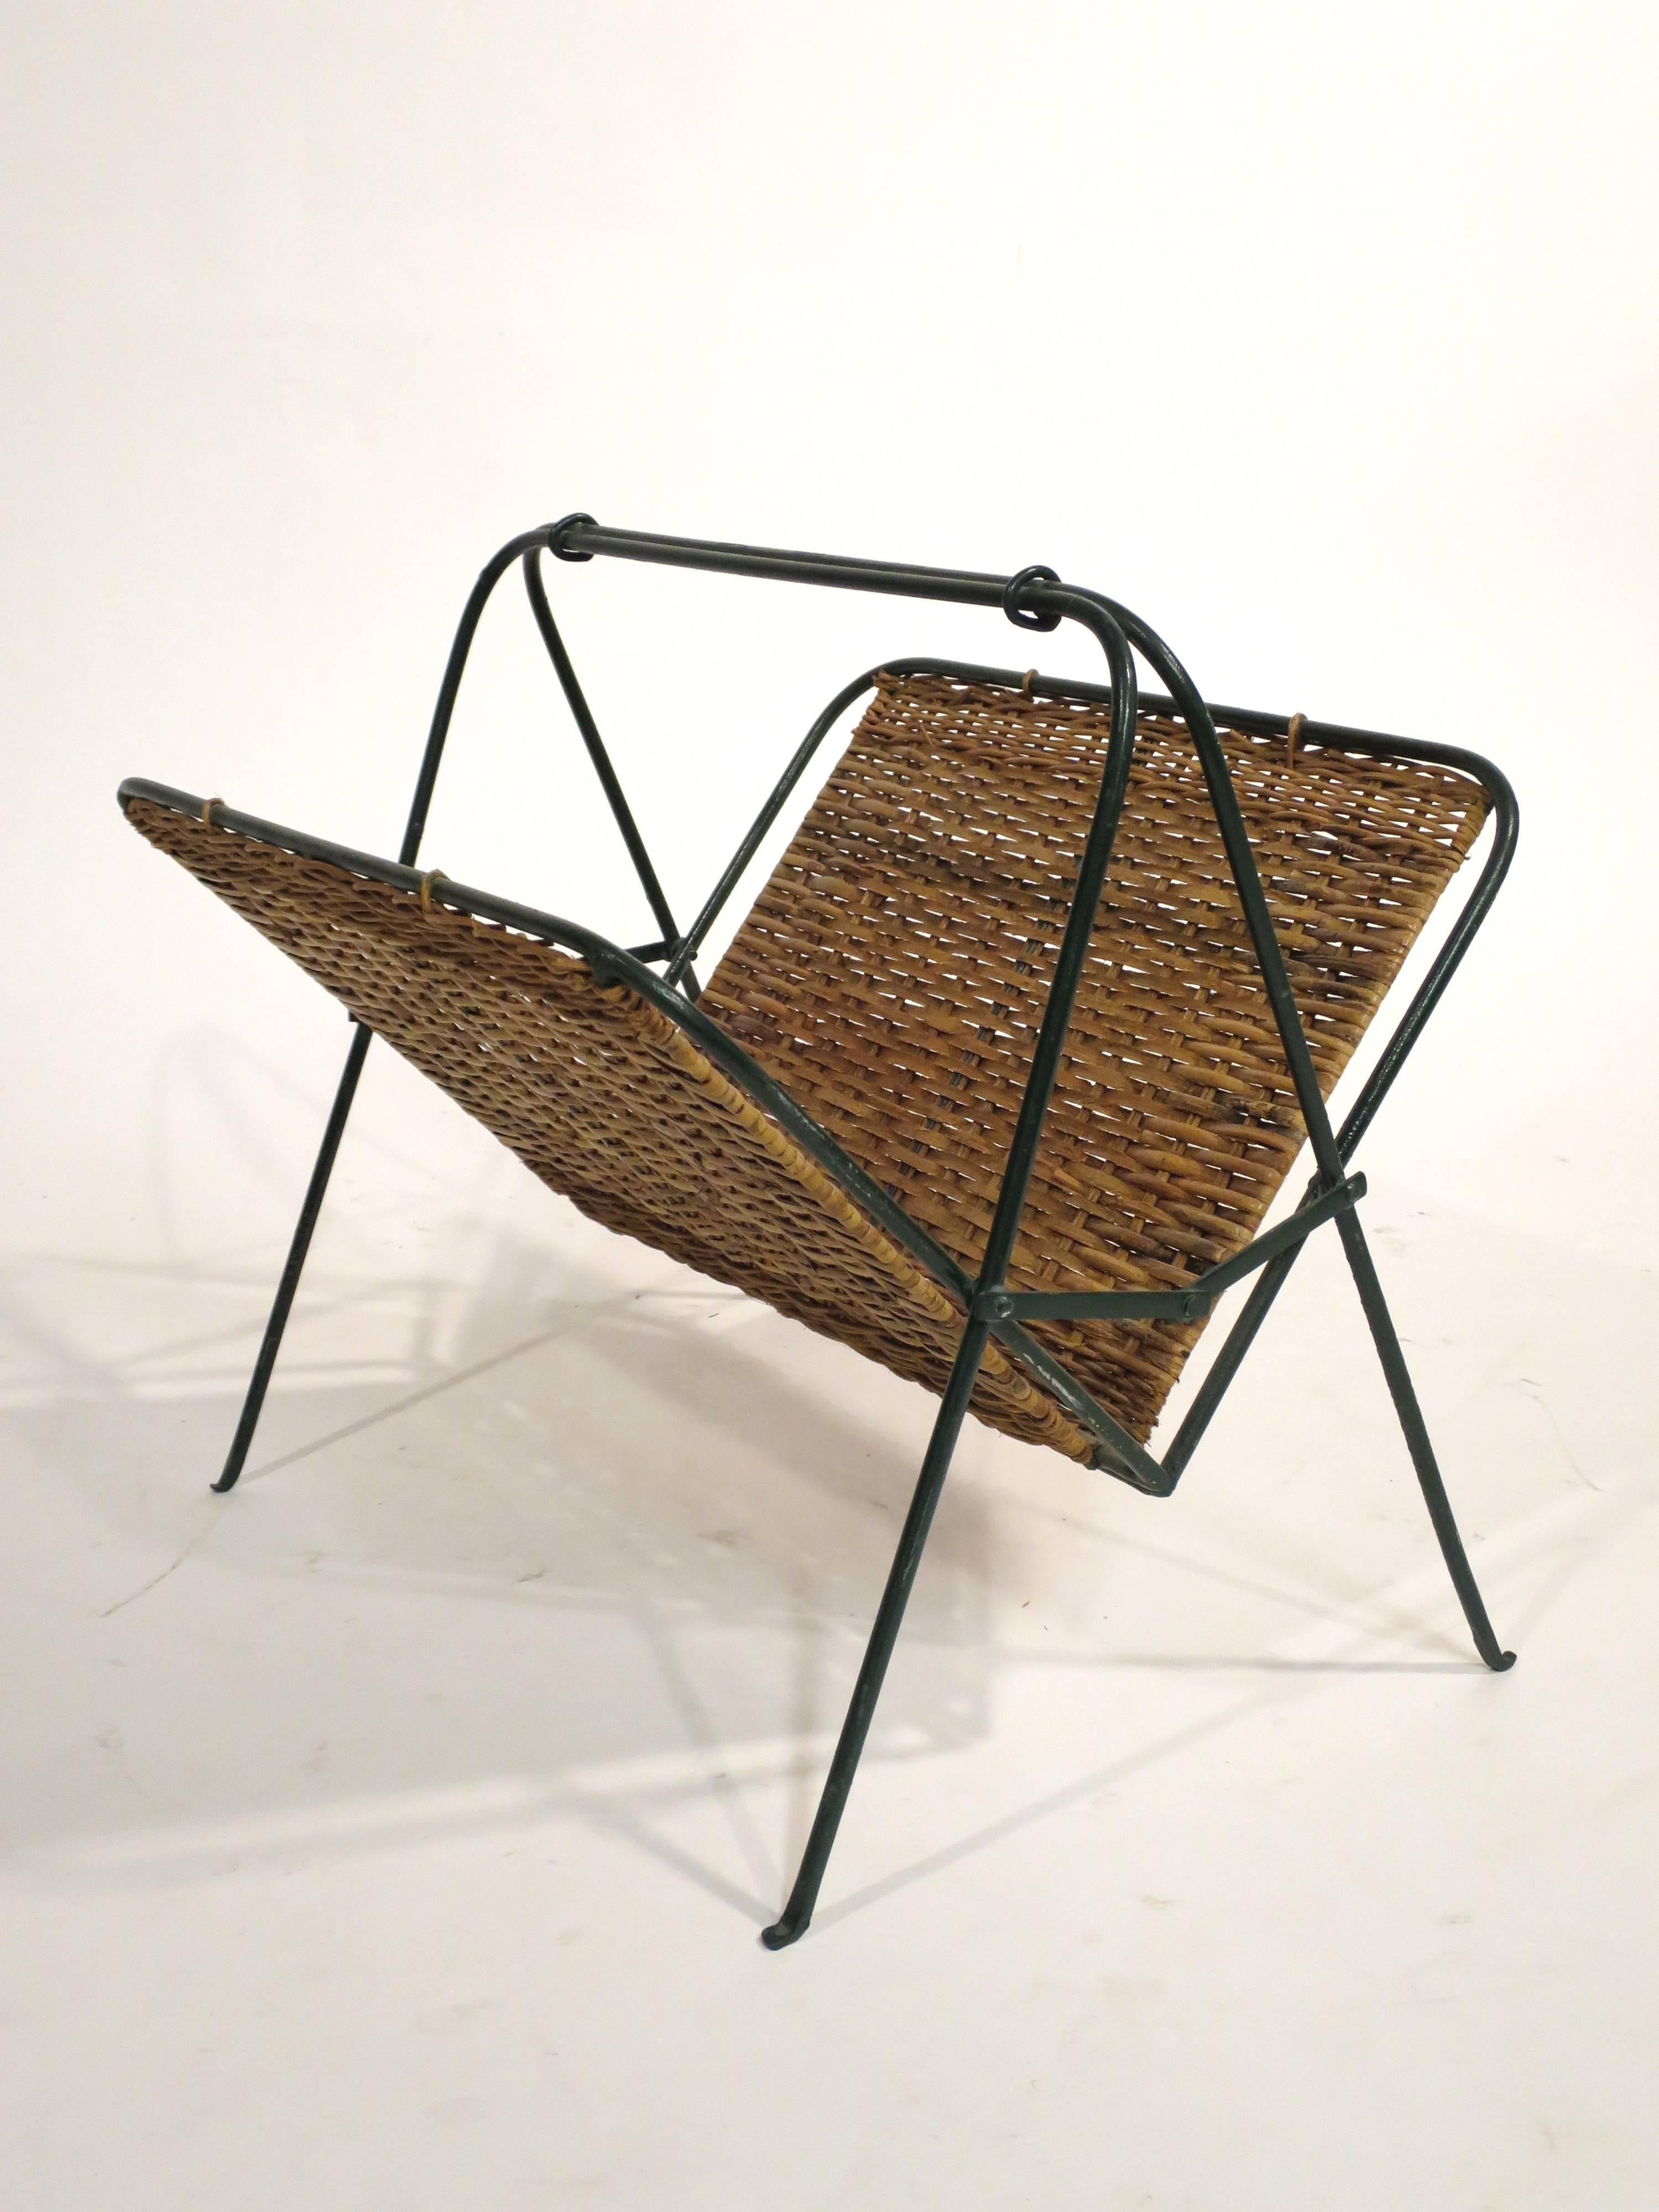 Mid-Century collapsible rattan and iron magazine rack, circa 1950s.
Complimentary shipping in the lower 48.